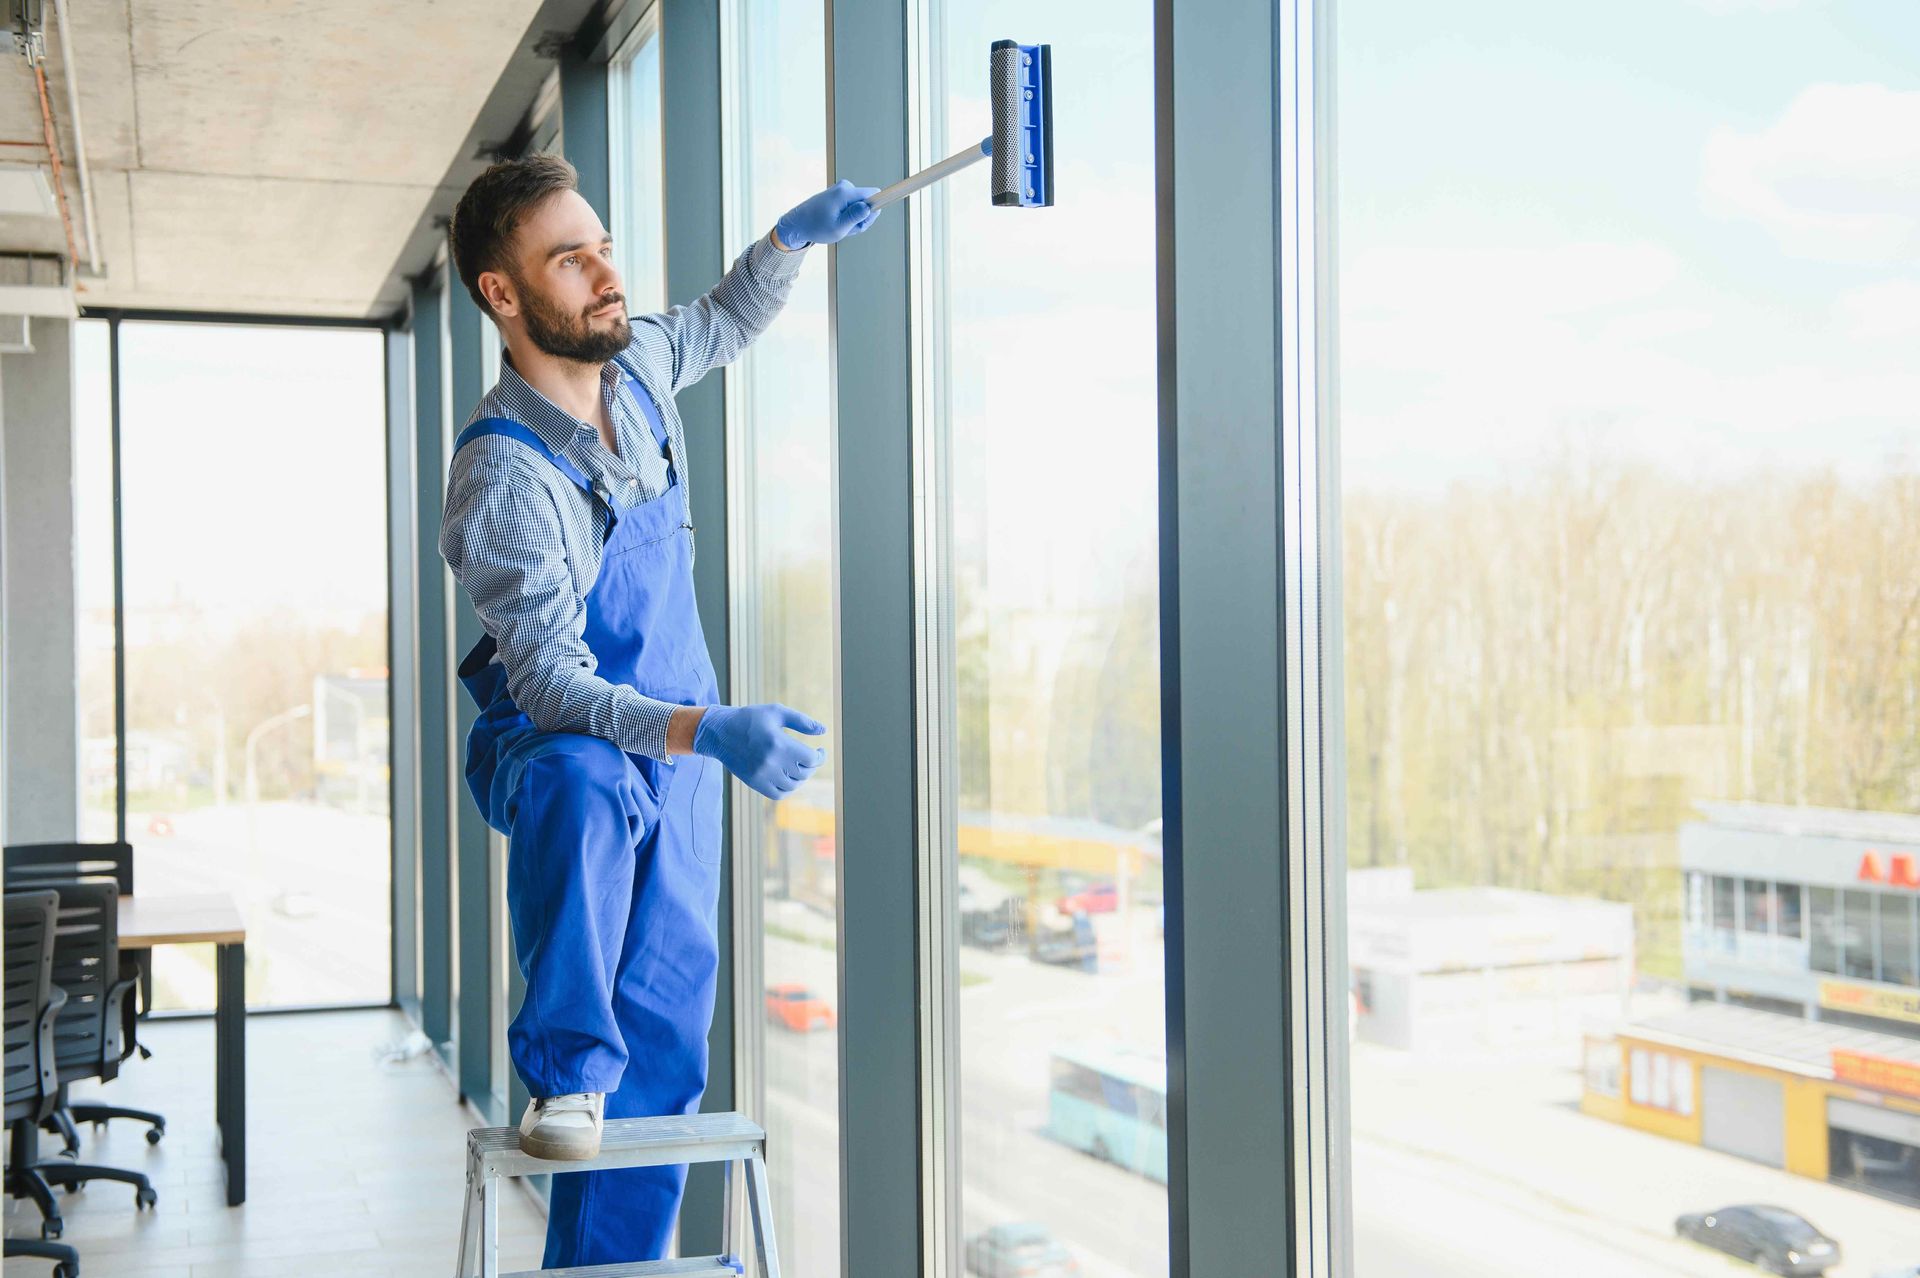 a man is standing on a ladder cleaning a window in an office .